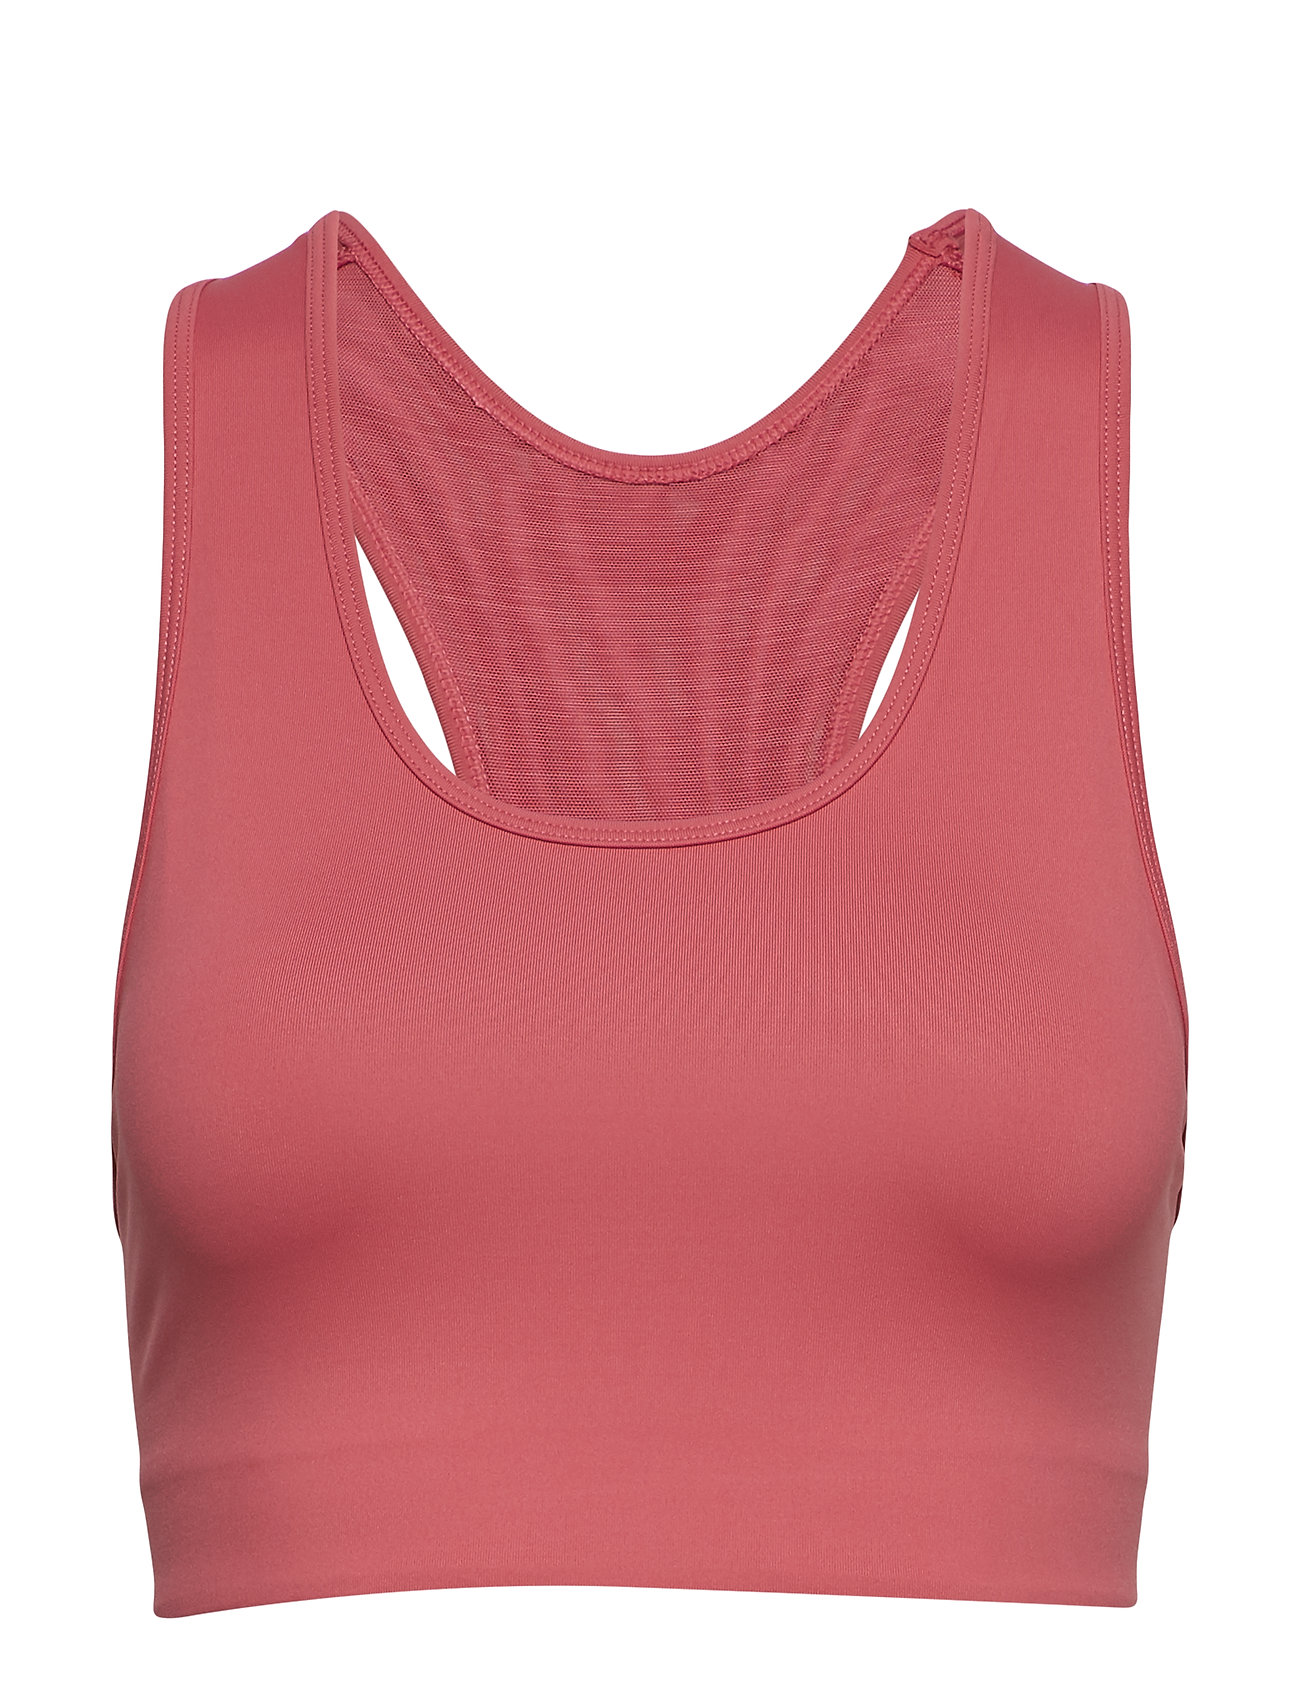 Compression Sports Bra A/B Lingerie Bras & Tops Sports Bras - ALL Vaaleanpunainen Stay In Place